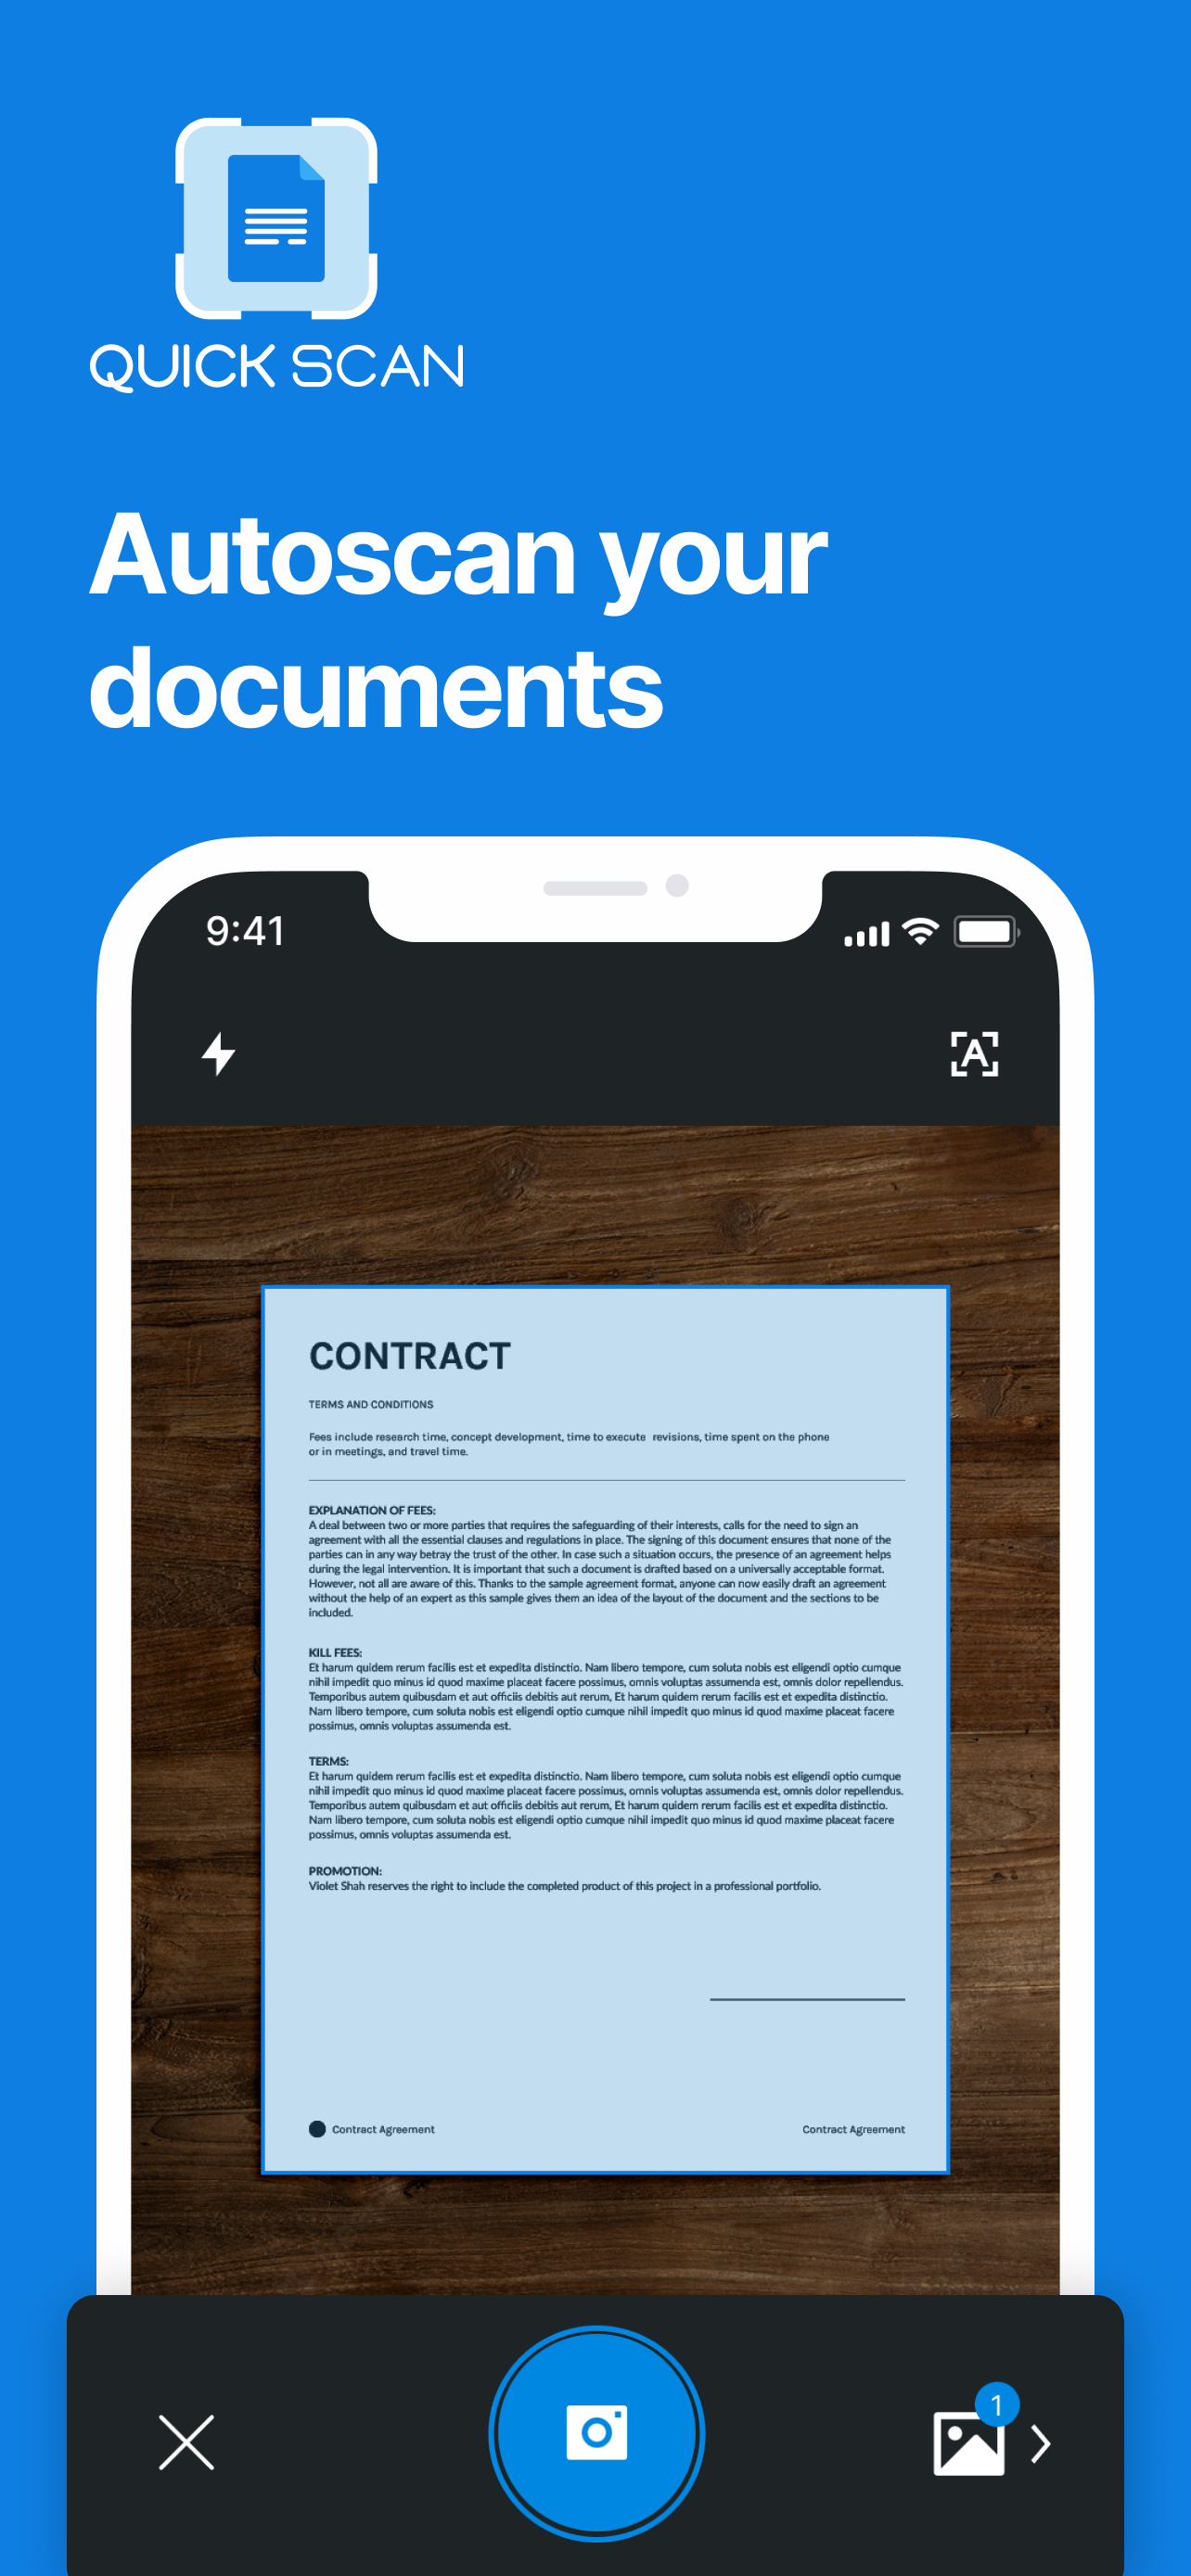 Autoscan your documents with QuickScan